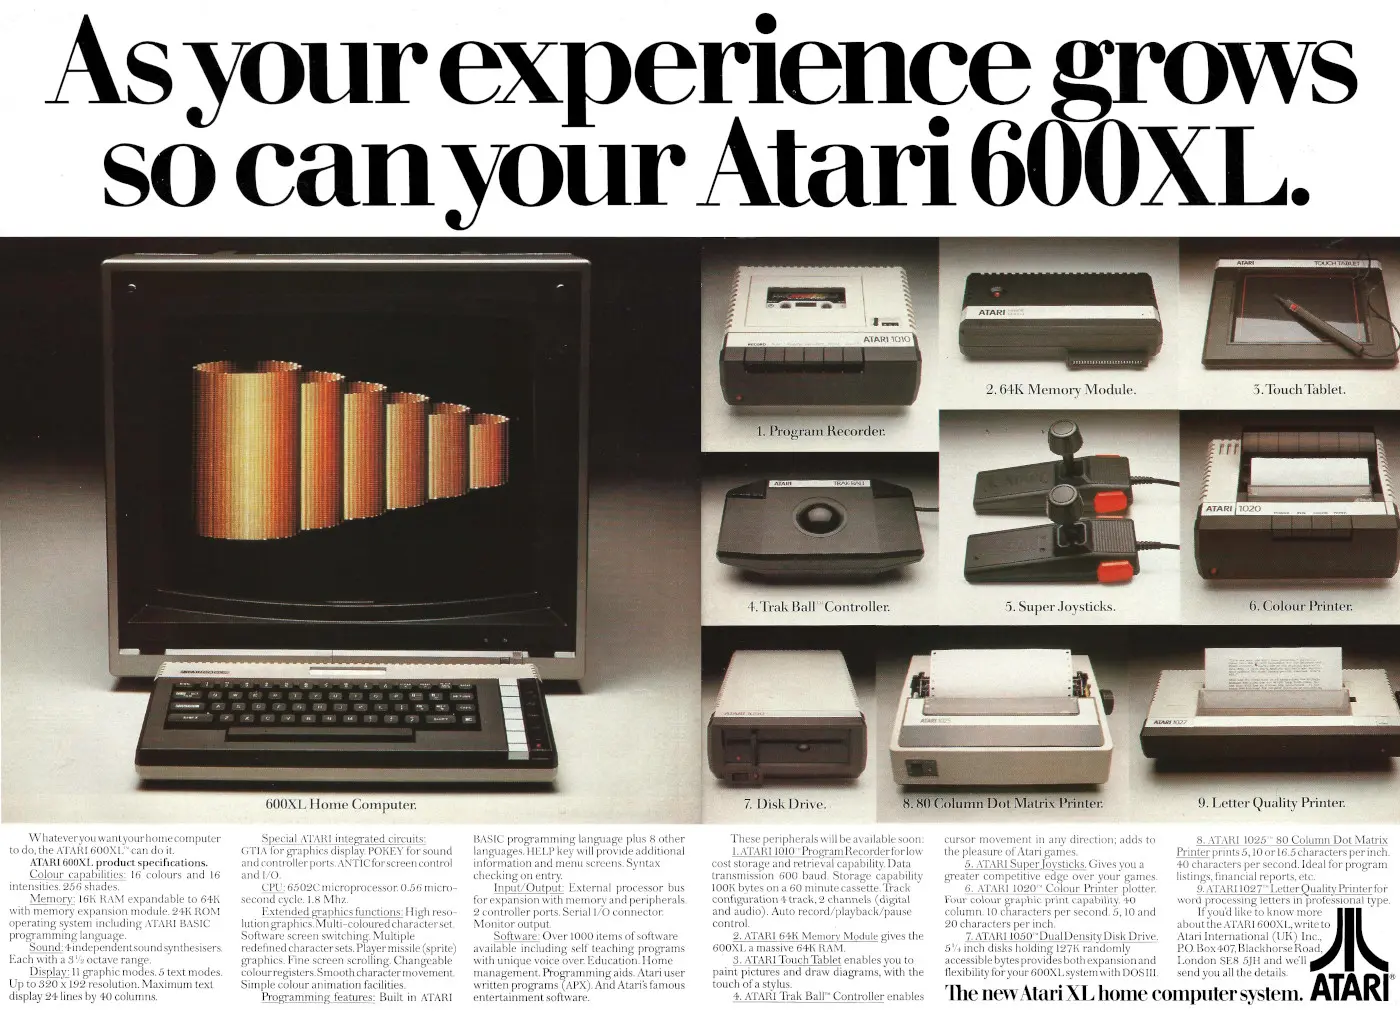 Atari Advert: As your experience grows, so can your Atari 600XL, from Your Computer, January 1984